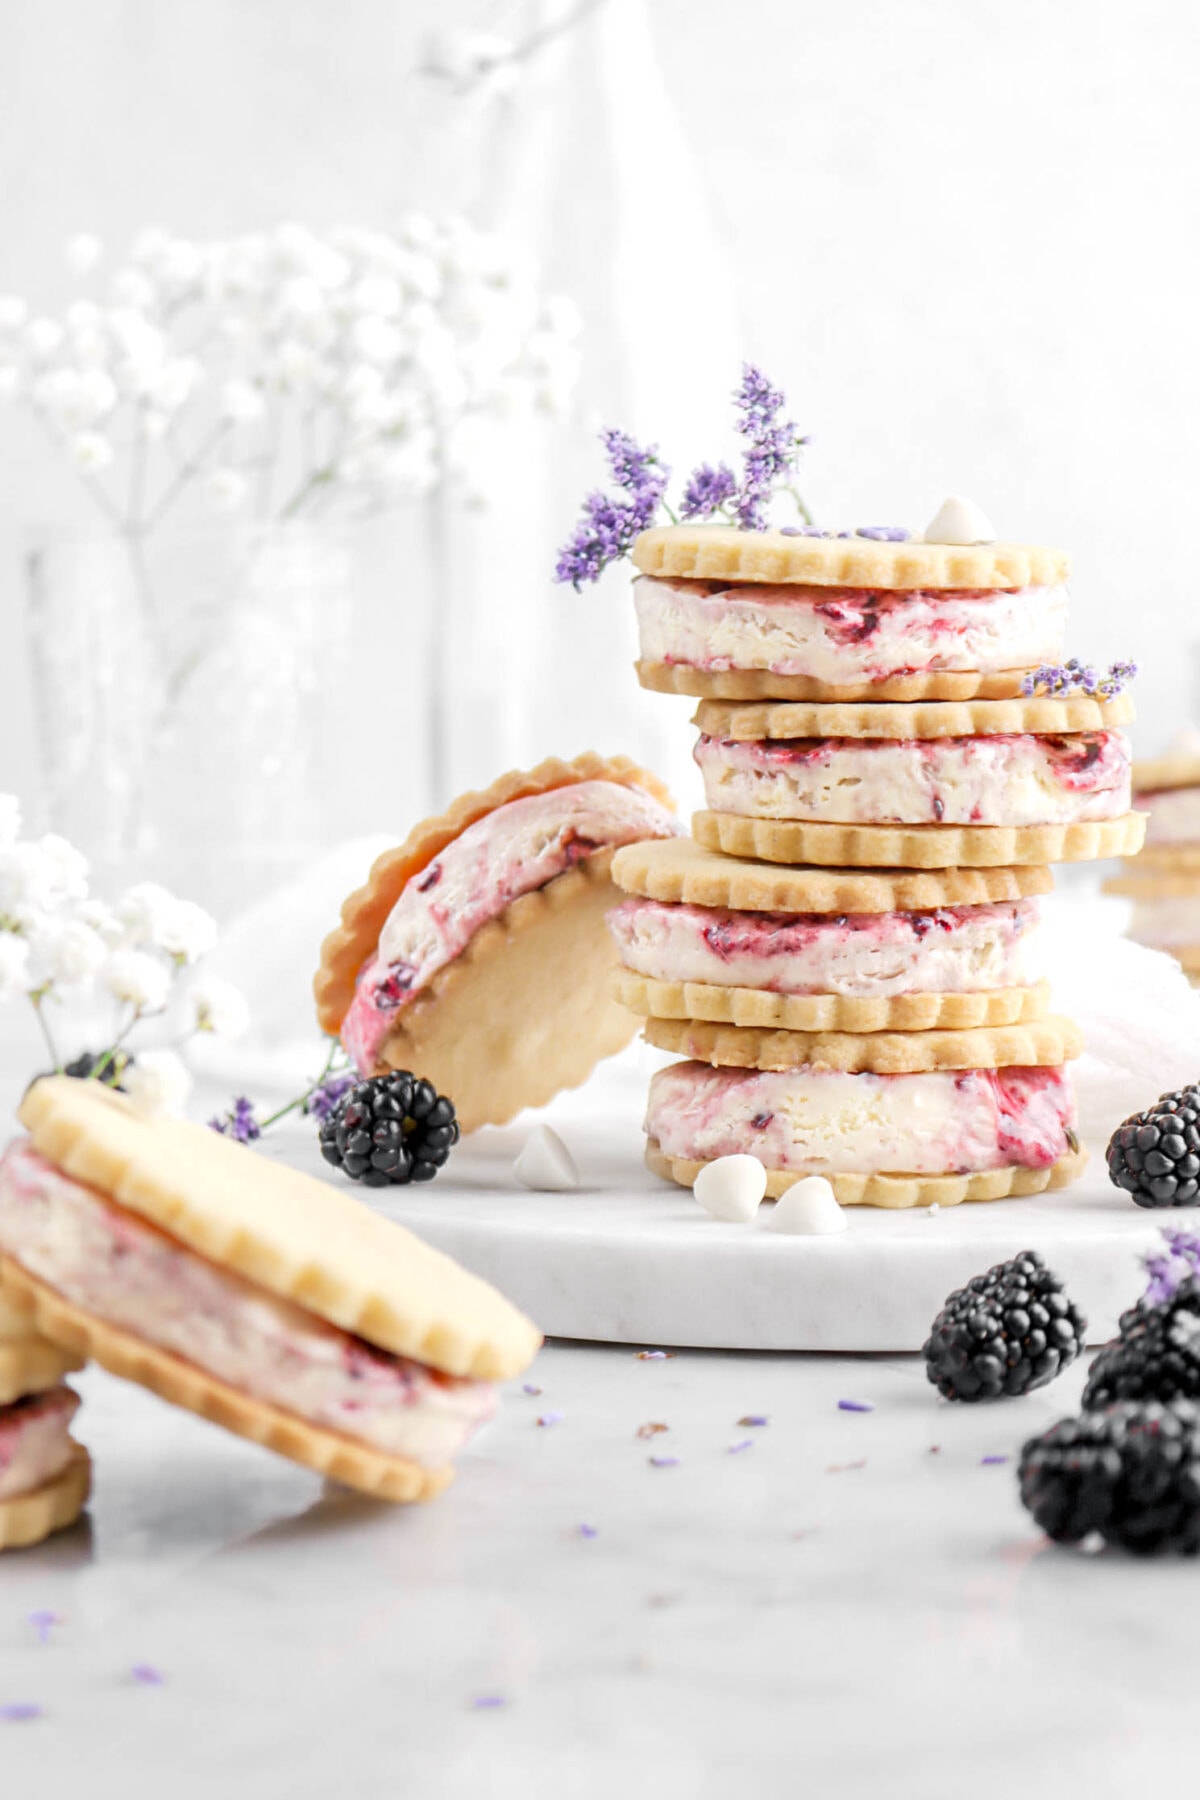 cropped front shot of stacked ice cream sandwiches on marble plate with two more ice cream sandwiches in front, blackberries, lavender buds, and white chocolate chips around.